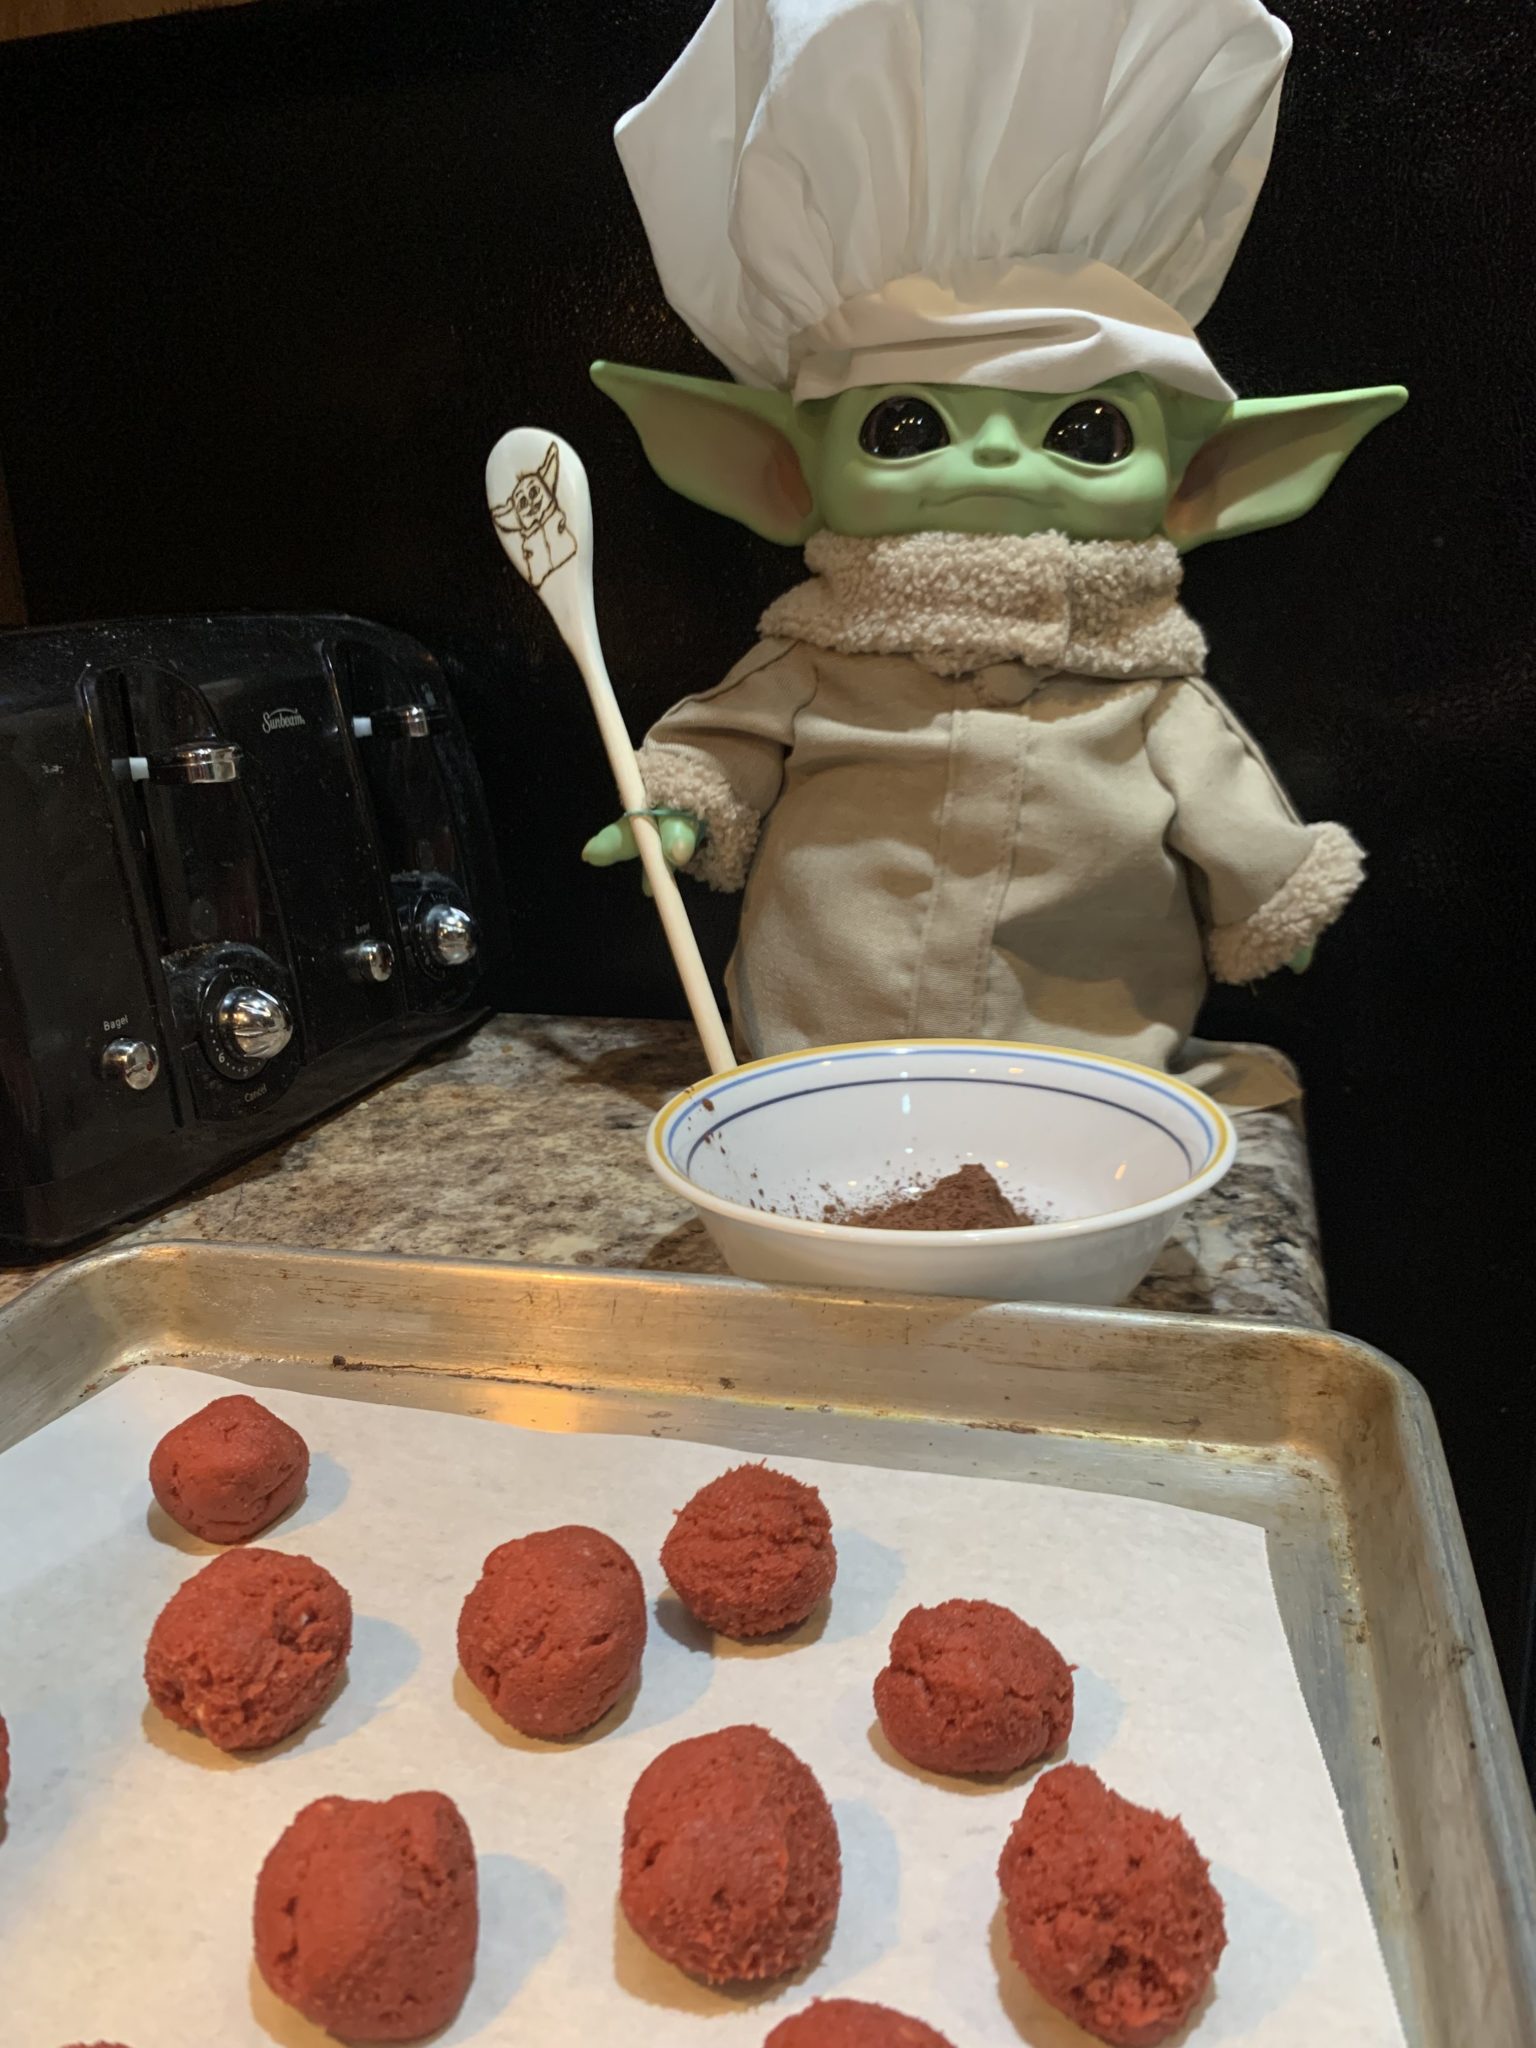 Grogu dressed as a chef with cookies.